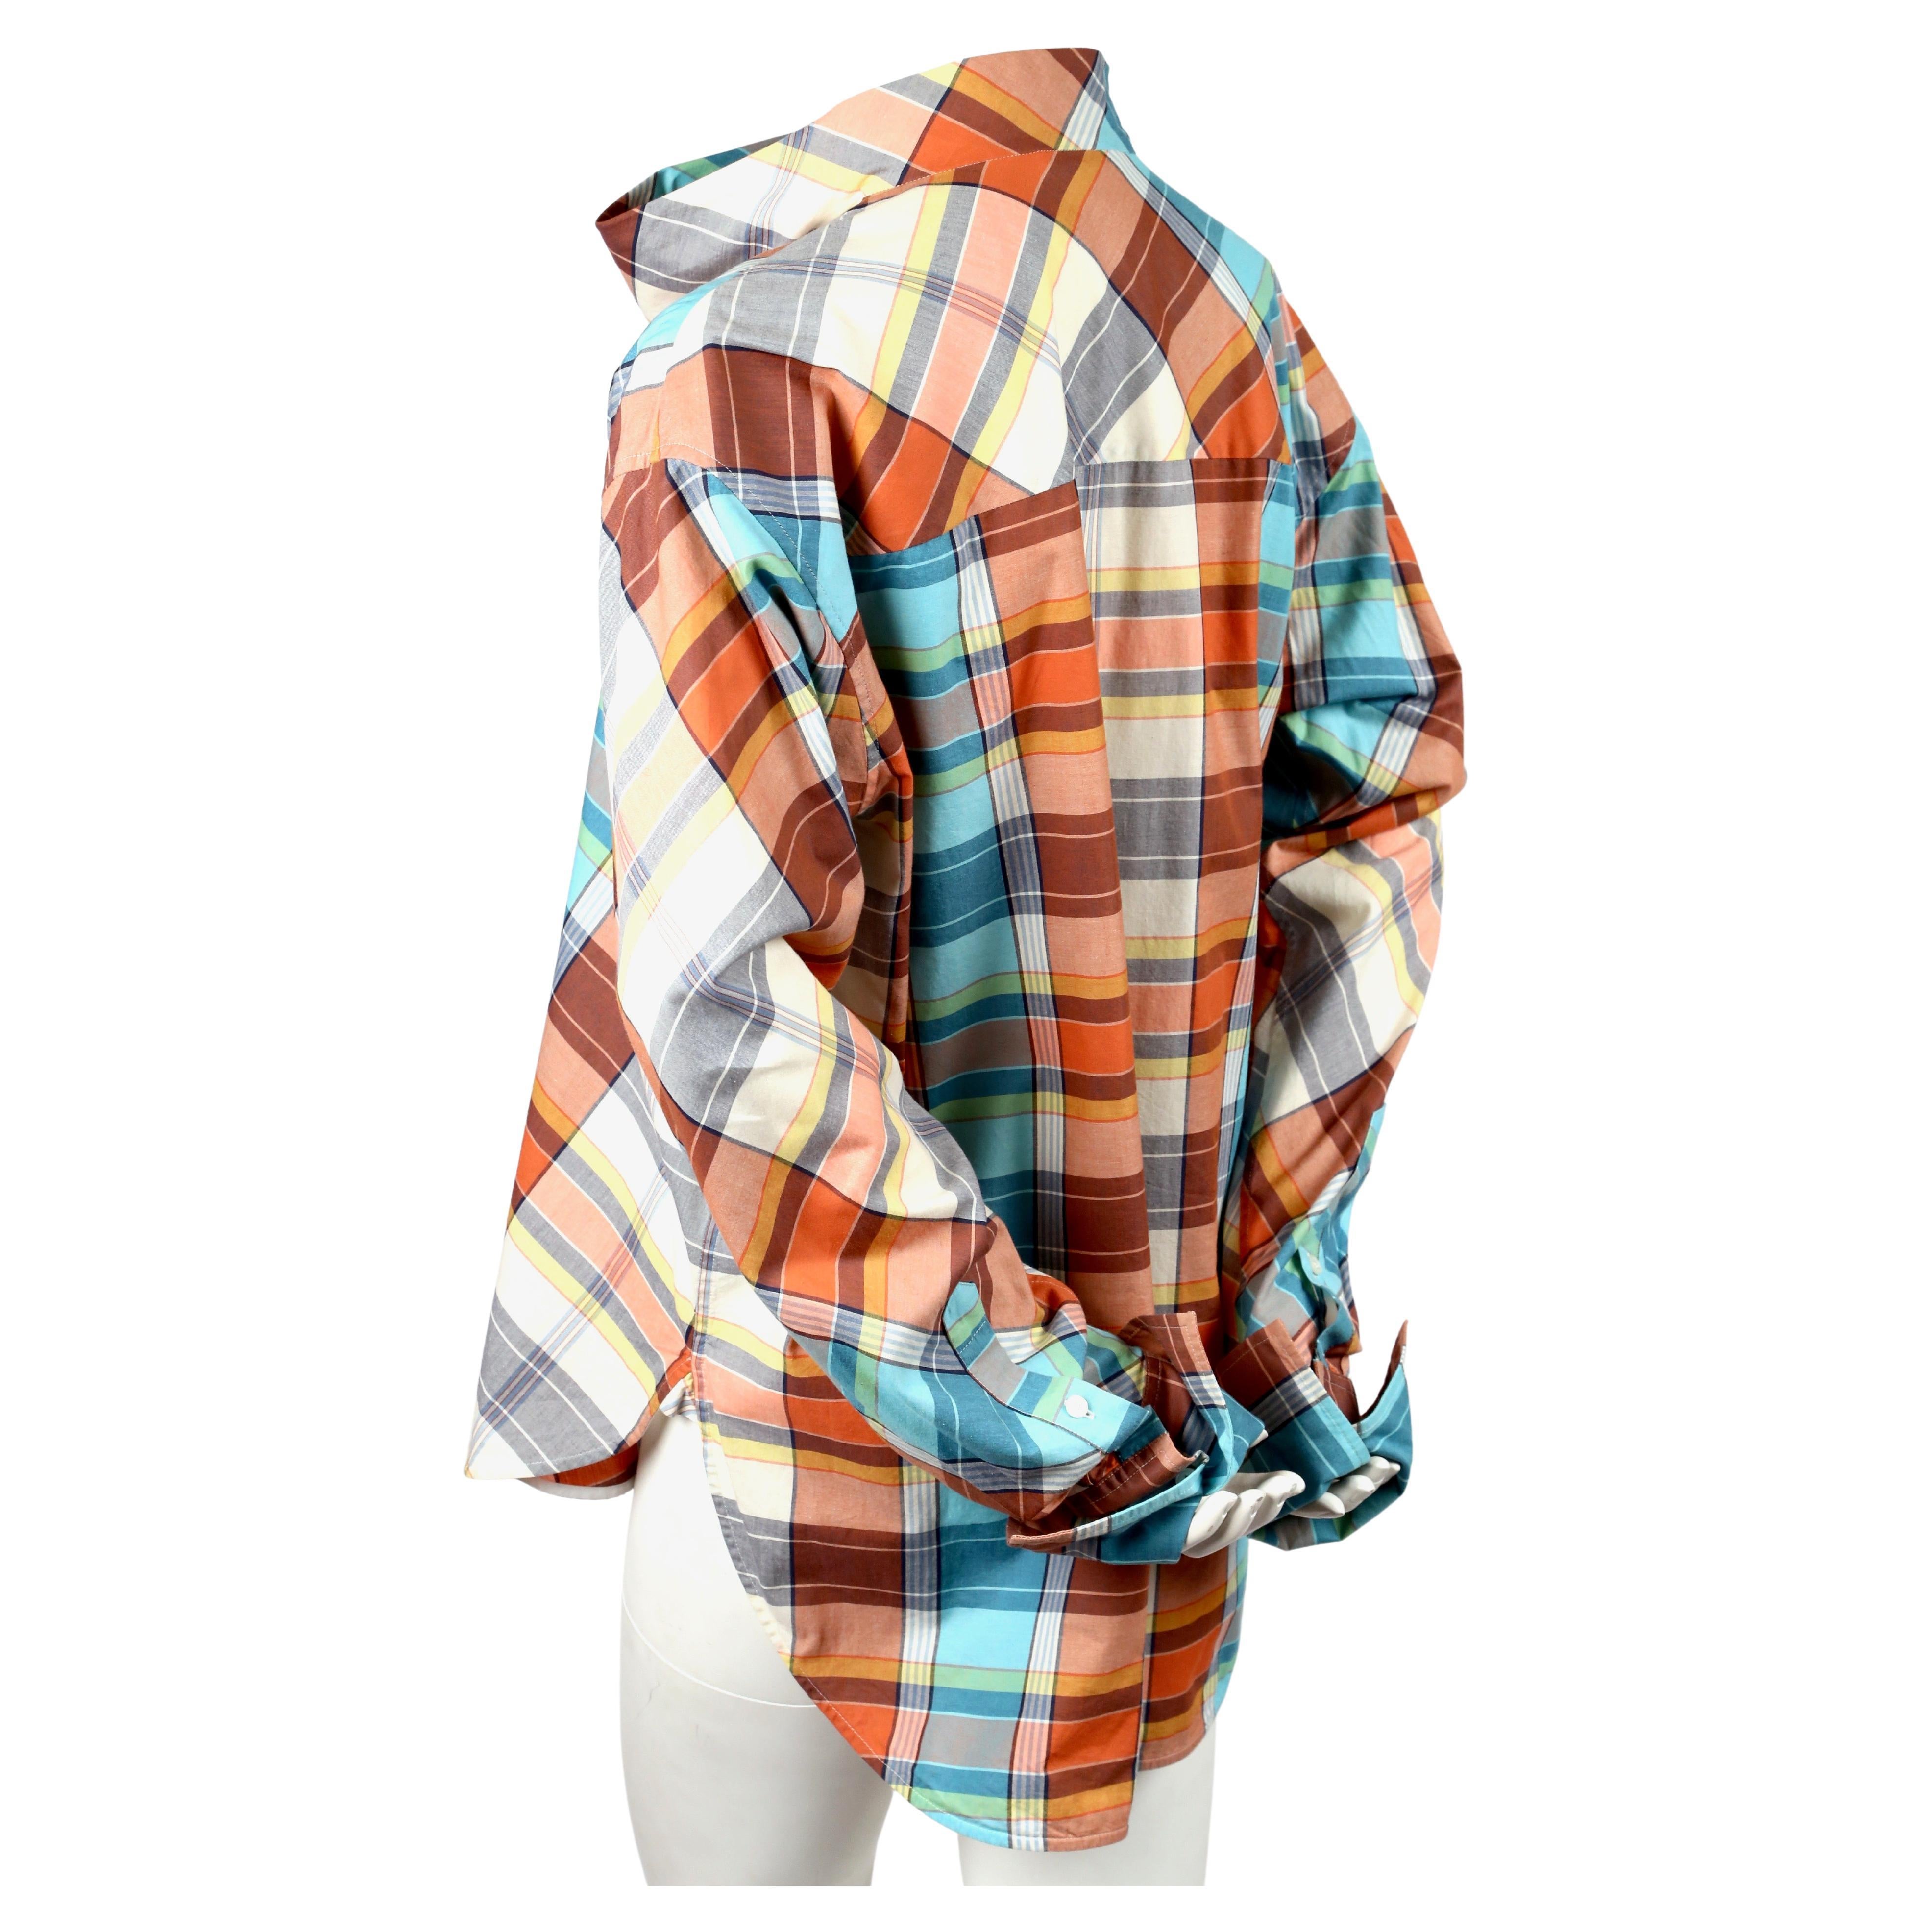 Women's or Men's NEW 2013 CELINE by PHOEBE PHILO plaid cotton runway top with draped neck For Sale